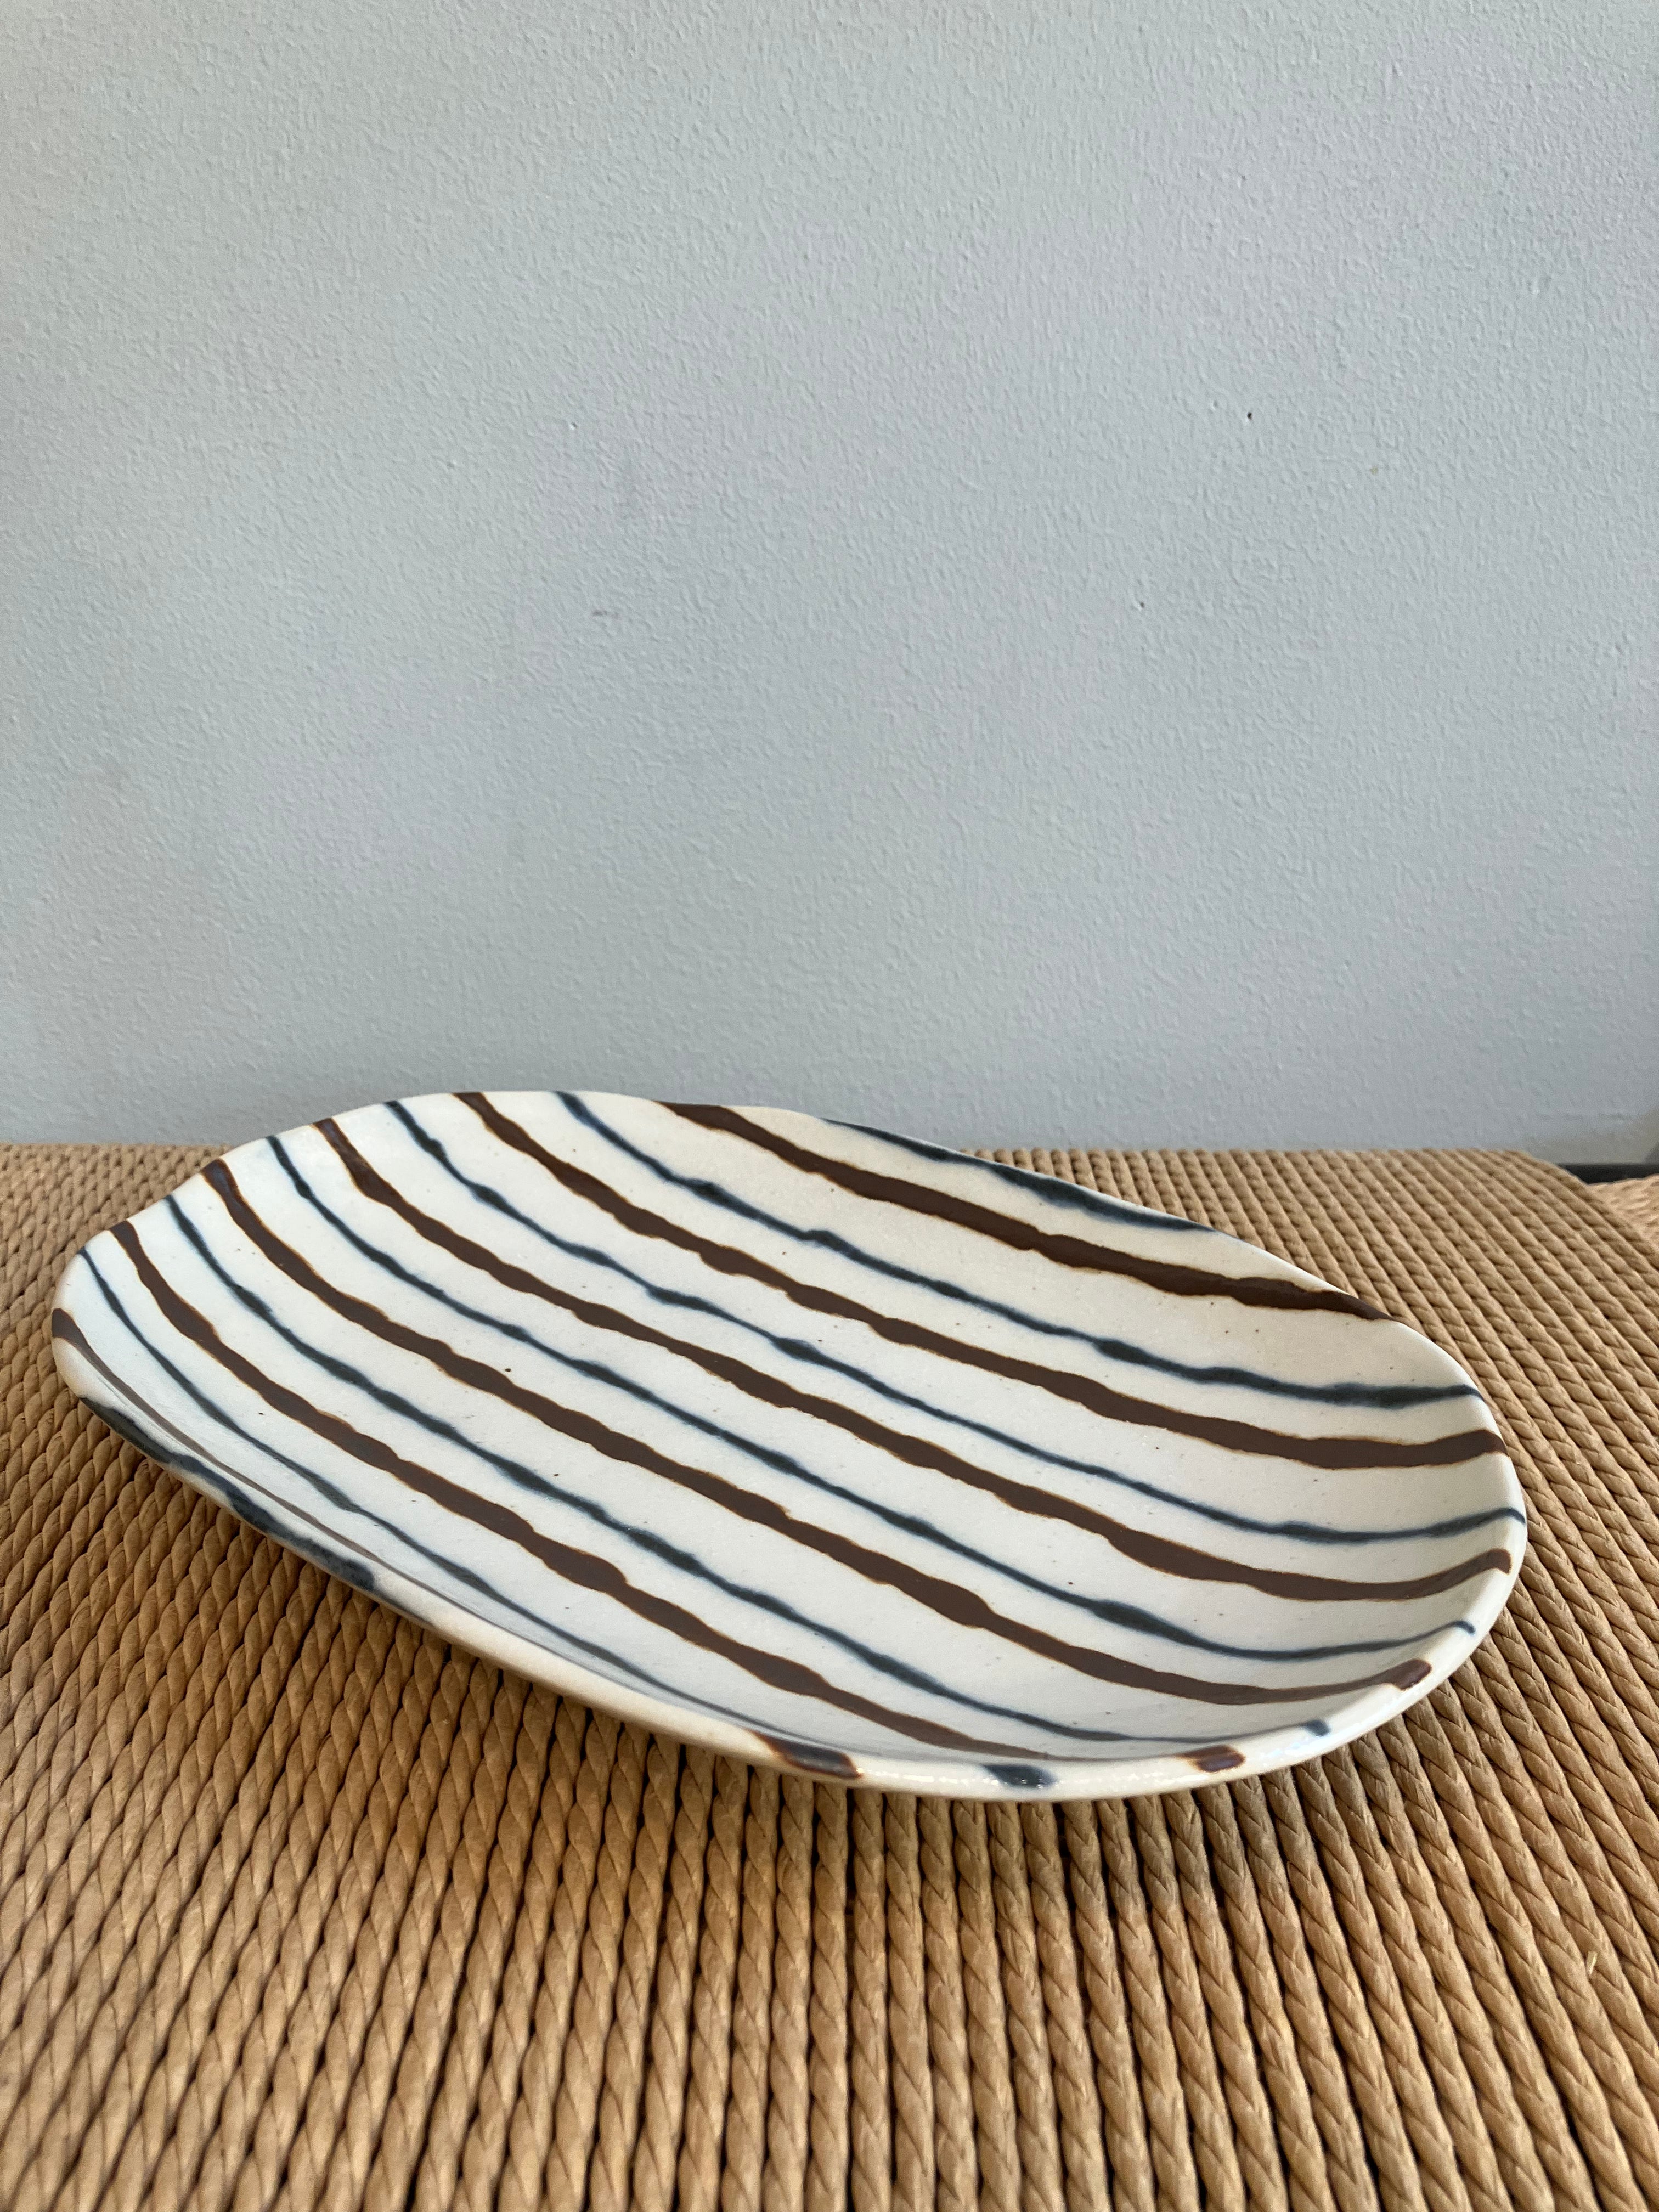 Oval dish with brown and blue stripes